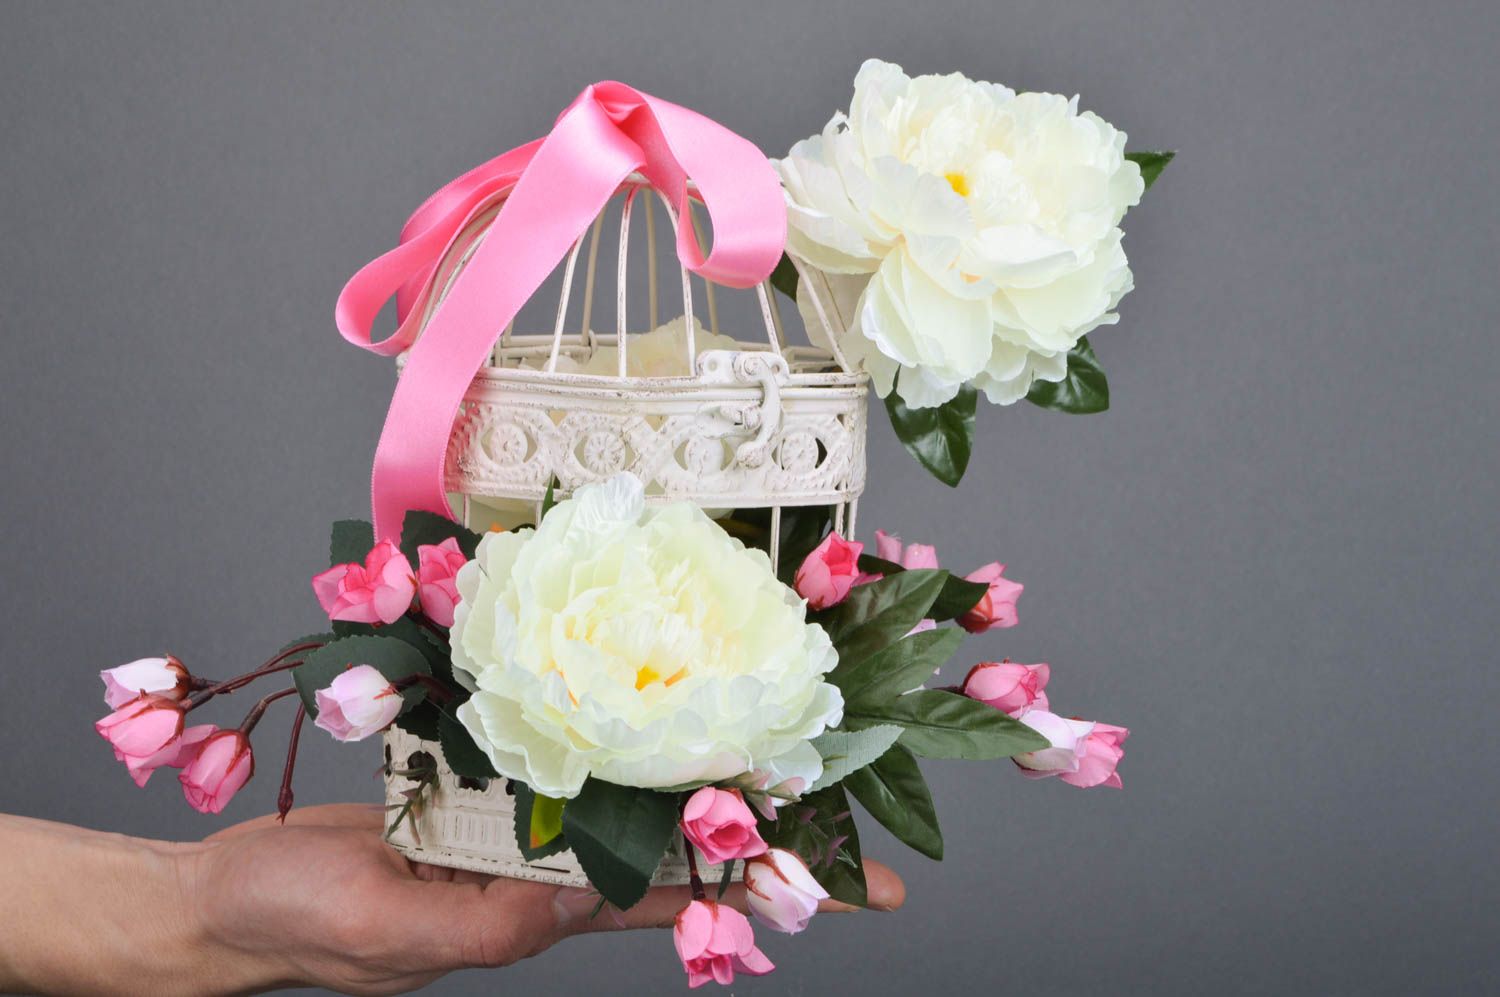 Handmade decorative cage with flowers and ribbons white peony interior ideas photo 3